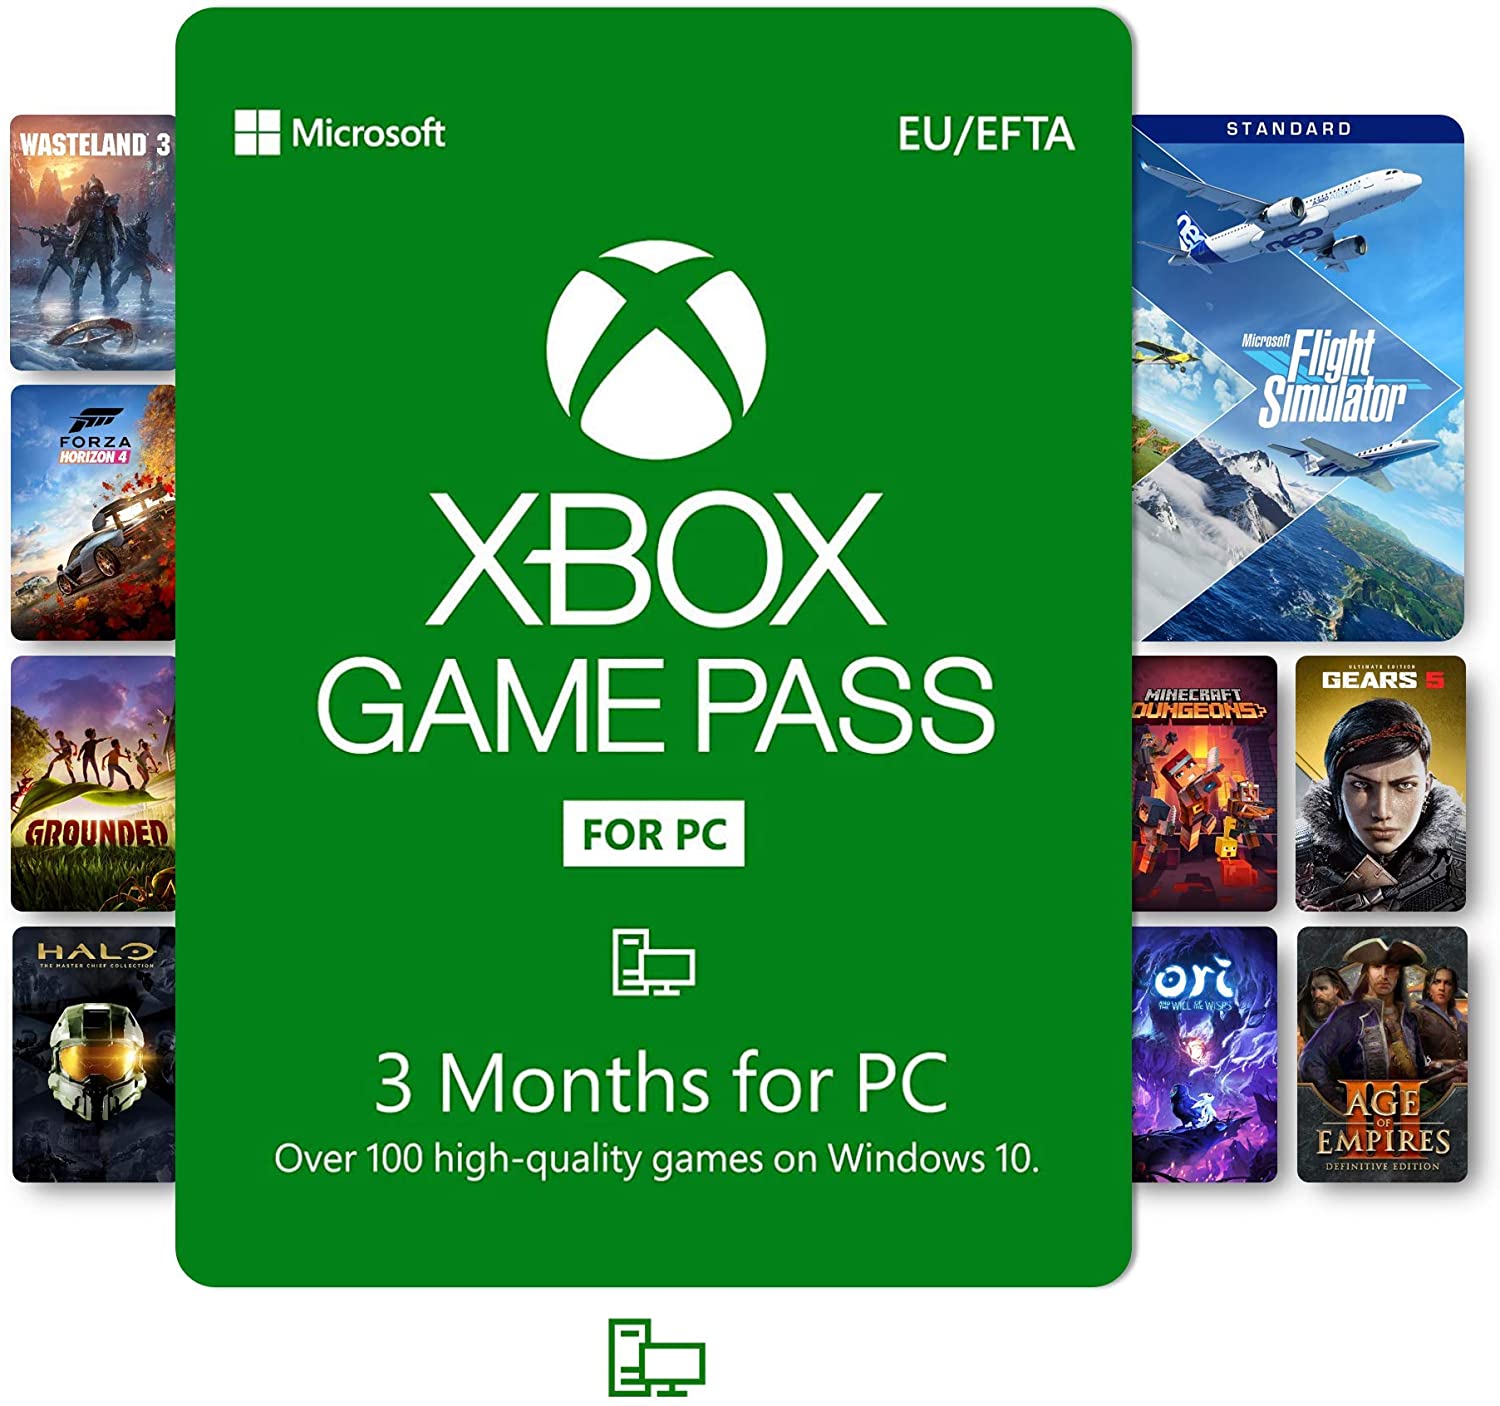 xbox pc game pass 3 months for 1 dollar